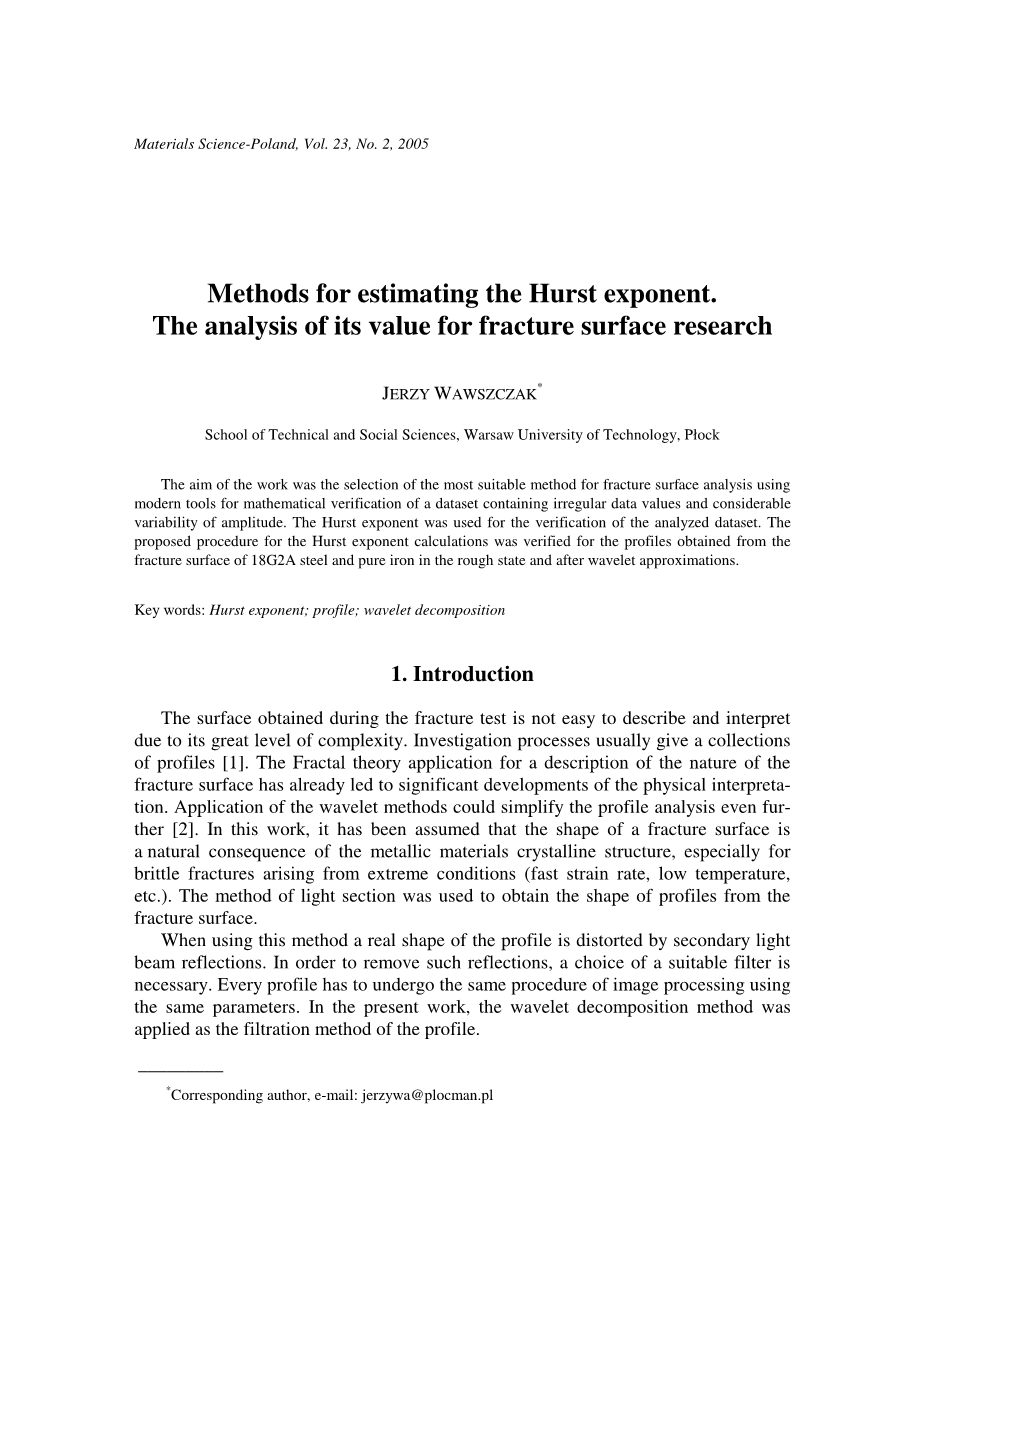 Methods for Estimating the Hurst Exponent. the Analysis of Its Value for Fracture Surface Research